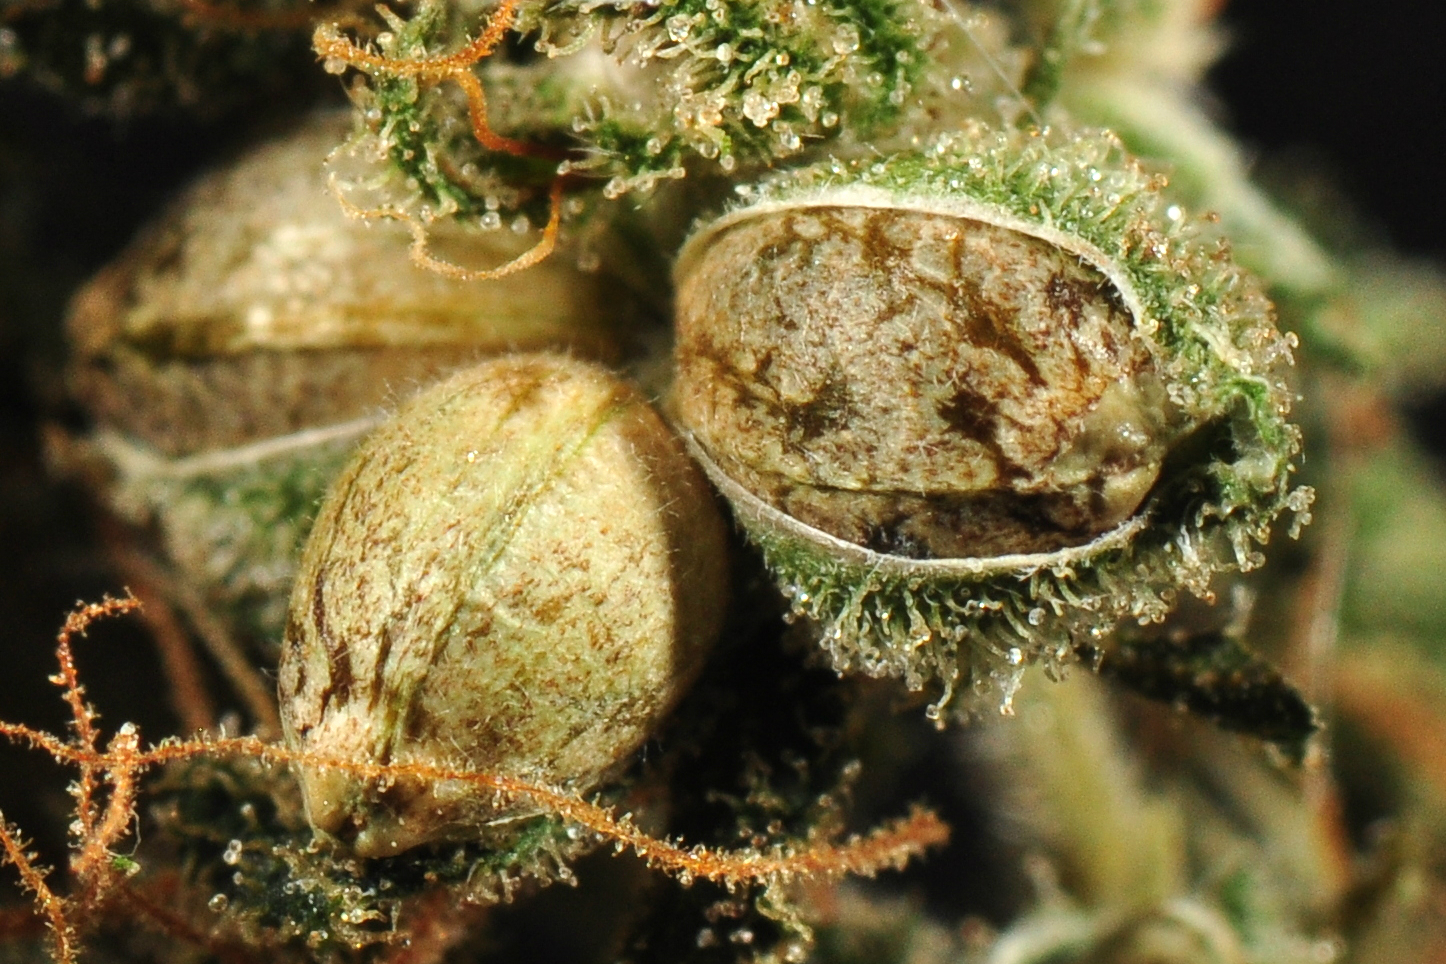 Male and female cannabis seeds